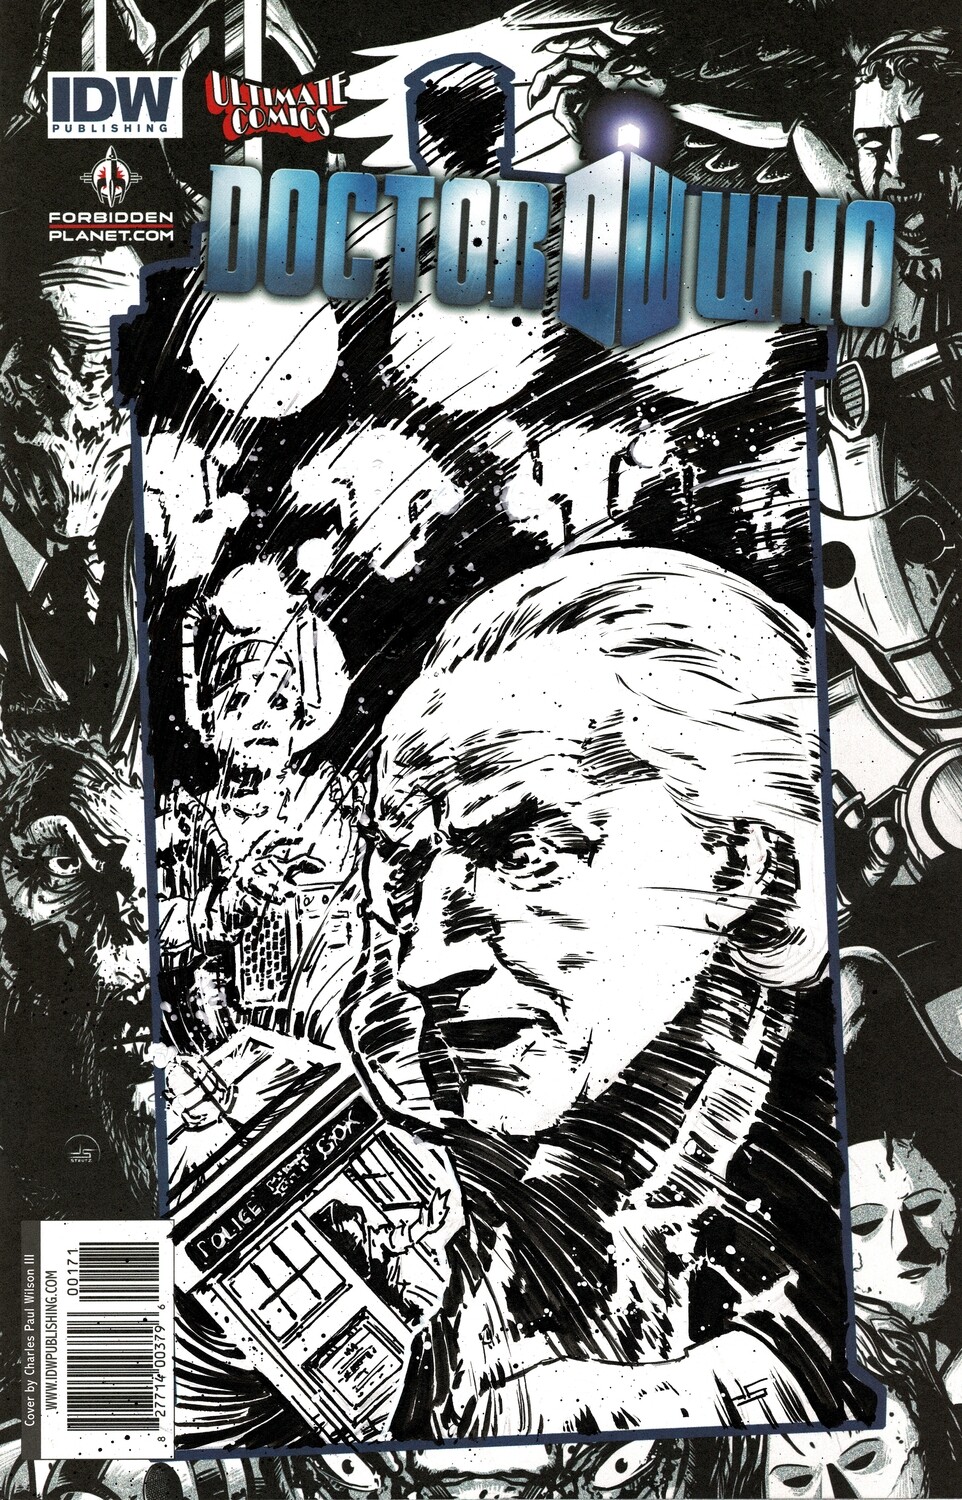 Doctor Who - The First Doctor - sketch cover